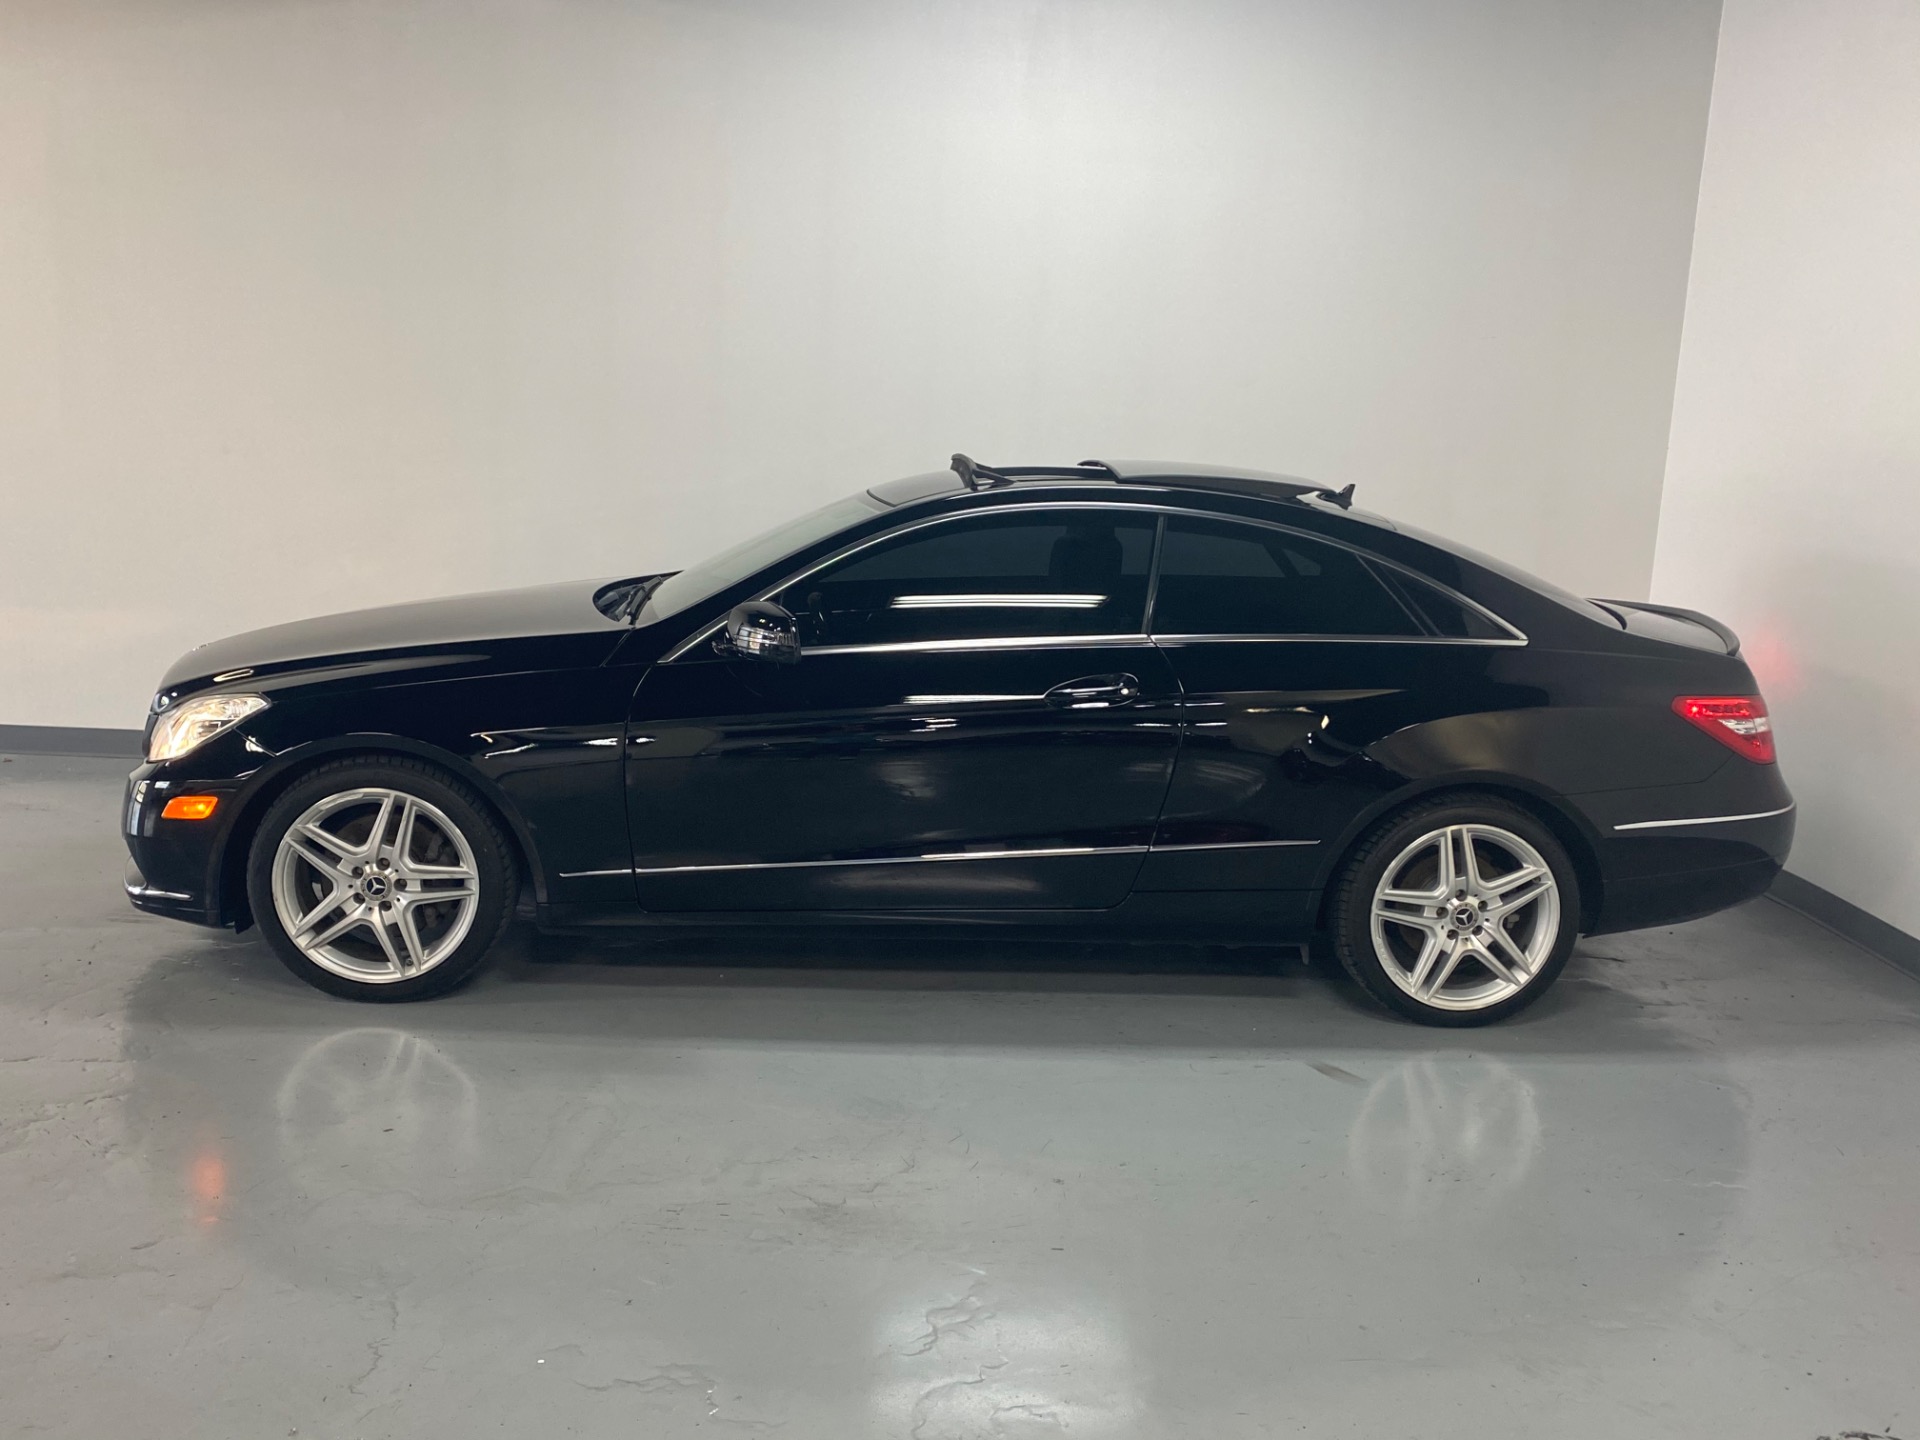 Used 13 Black Mercedes Benz E Class 50 Coupe Awd E 350 4matic For Sale Sold Prime Motorz Stock 2874